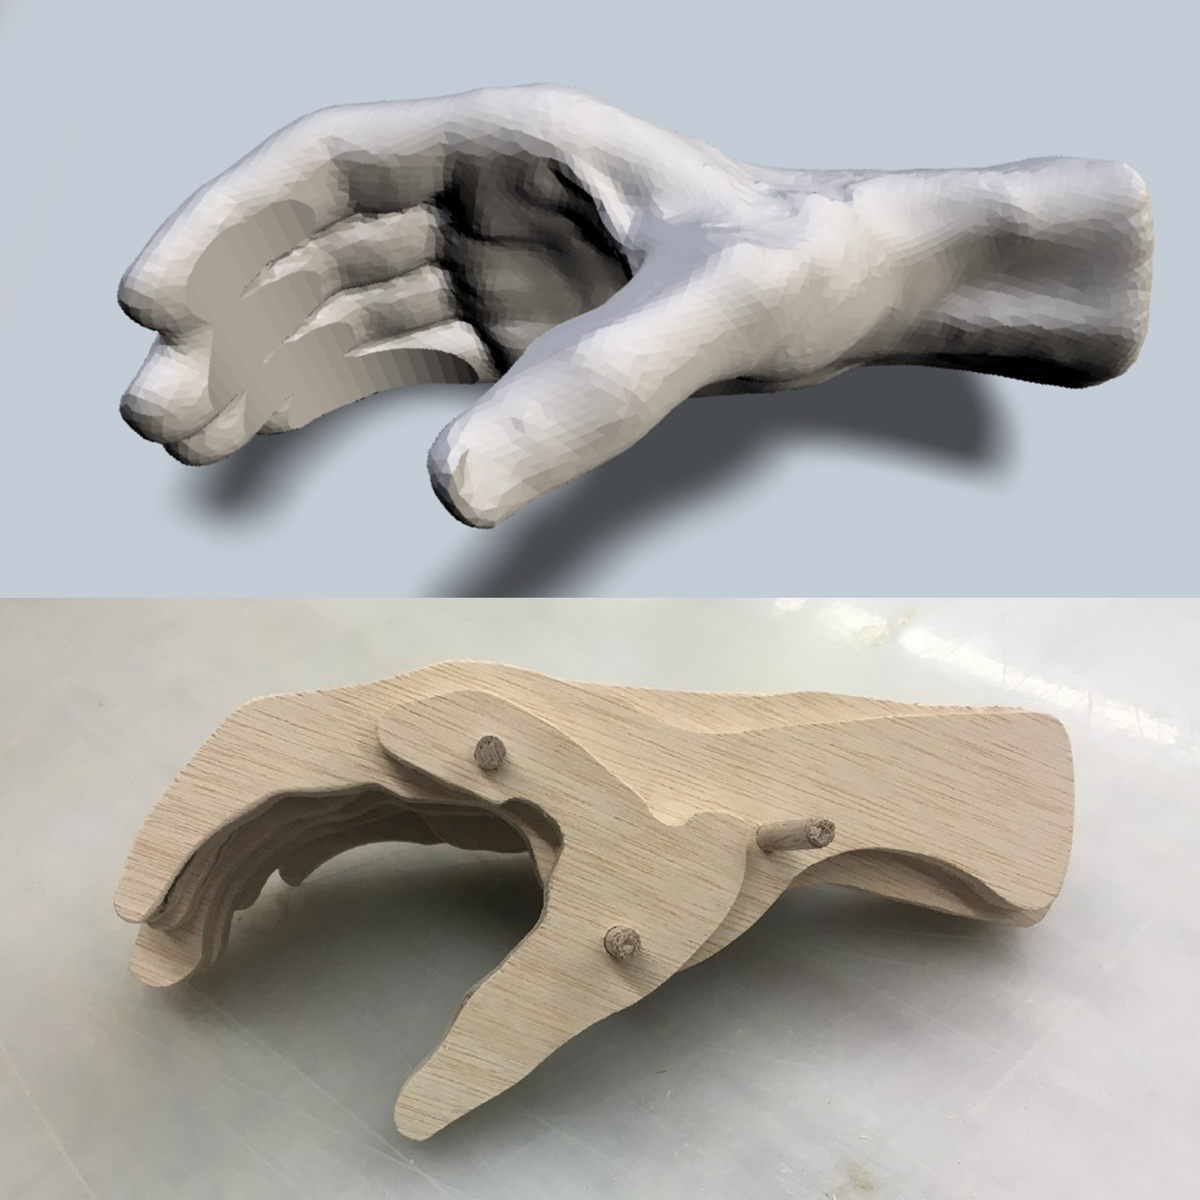 3D scan of a hand, and a wooden hand CNC'd from the model.